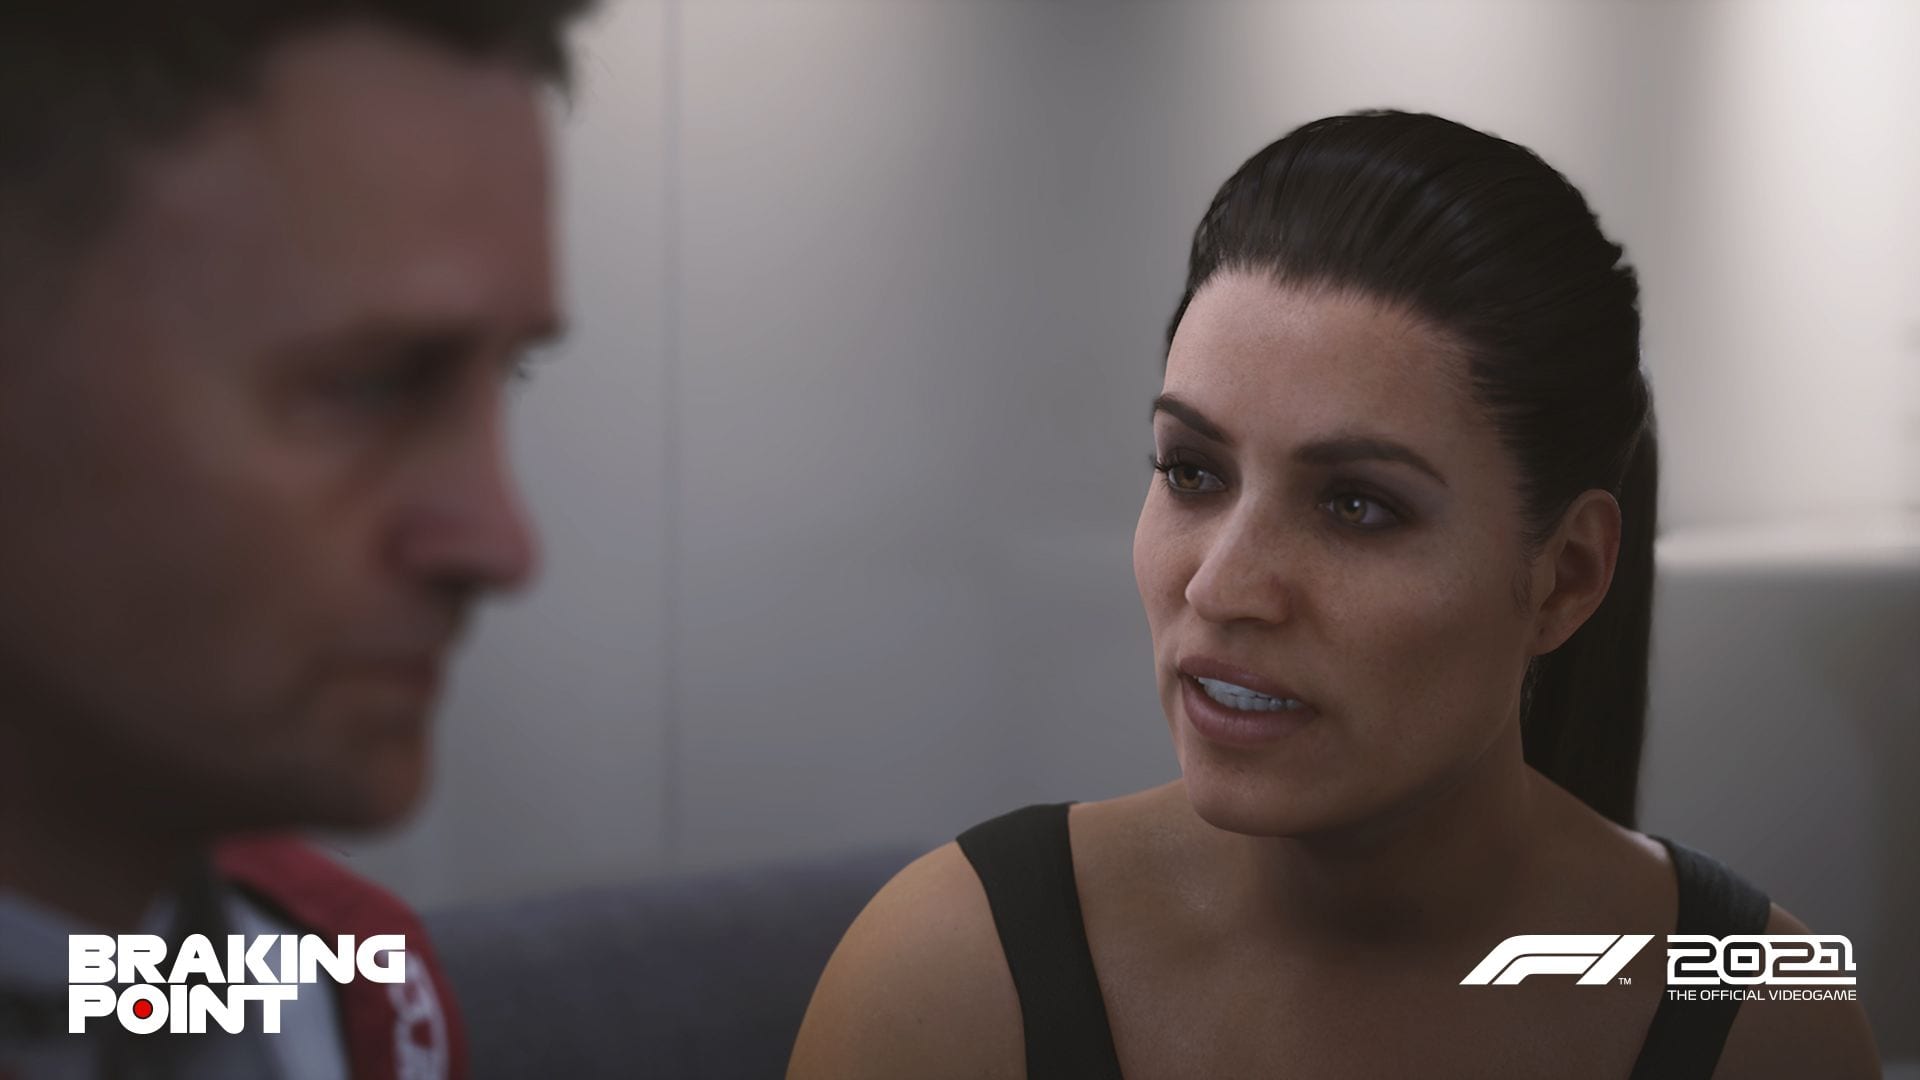 F1 2021 Story Mode 'Braking Point' Cast and Screenshots Revealed